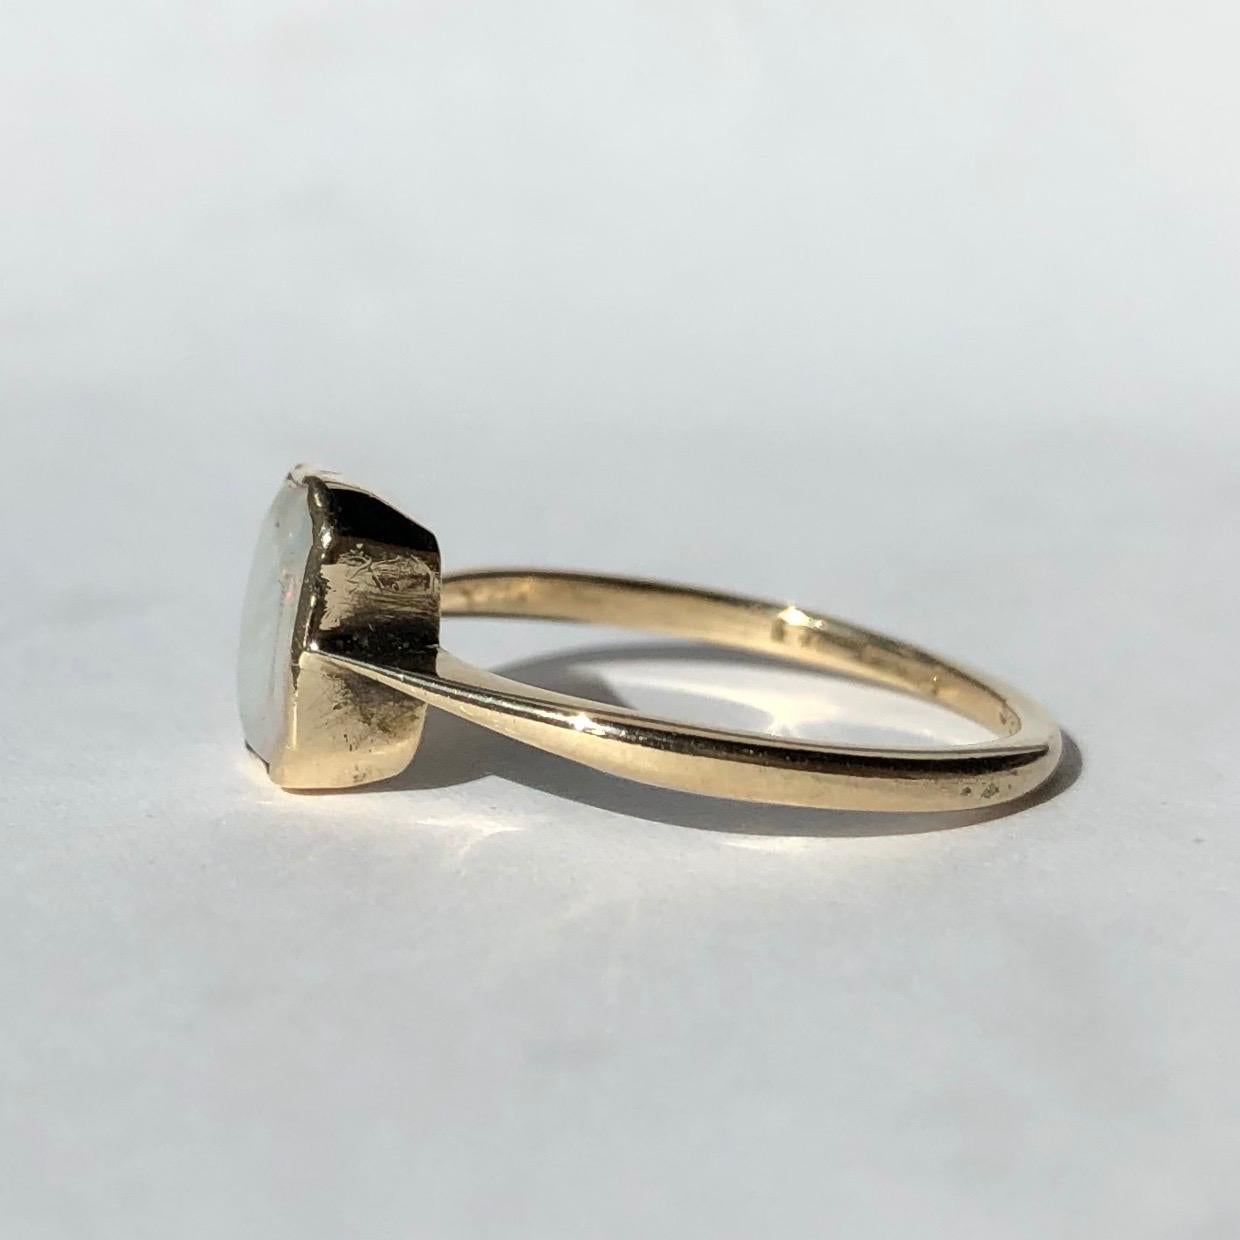 This ring has a classic Art Deco feel with the shape of the setting. The opal is pale but has bright flecks of colour running through. The setting and band is very simple and modelled in 18ct gold. 

Ring Size: M 1/2 or 6 1/2
Stone Dimensions: 8x6mm